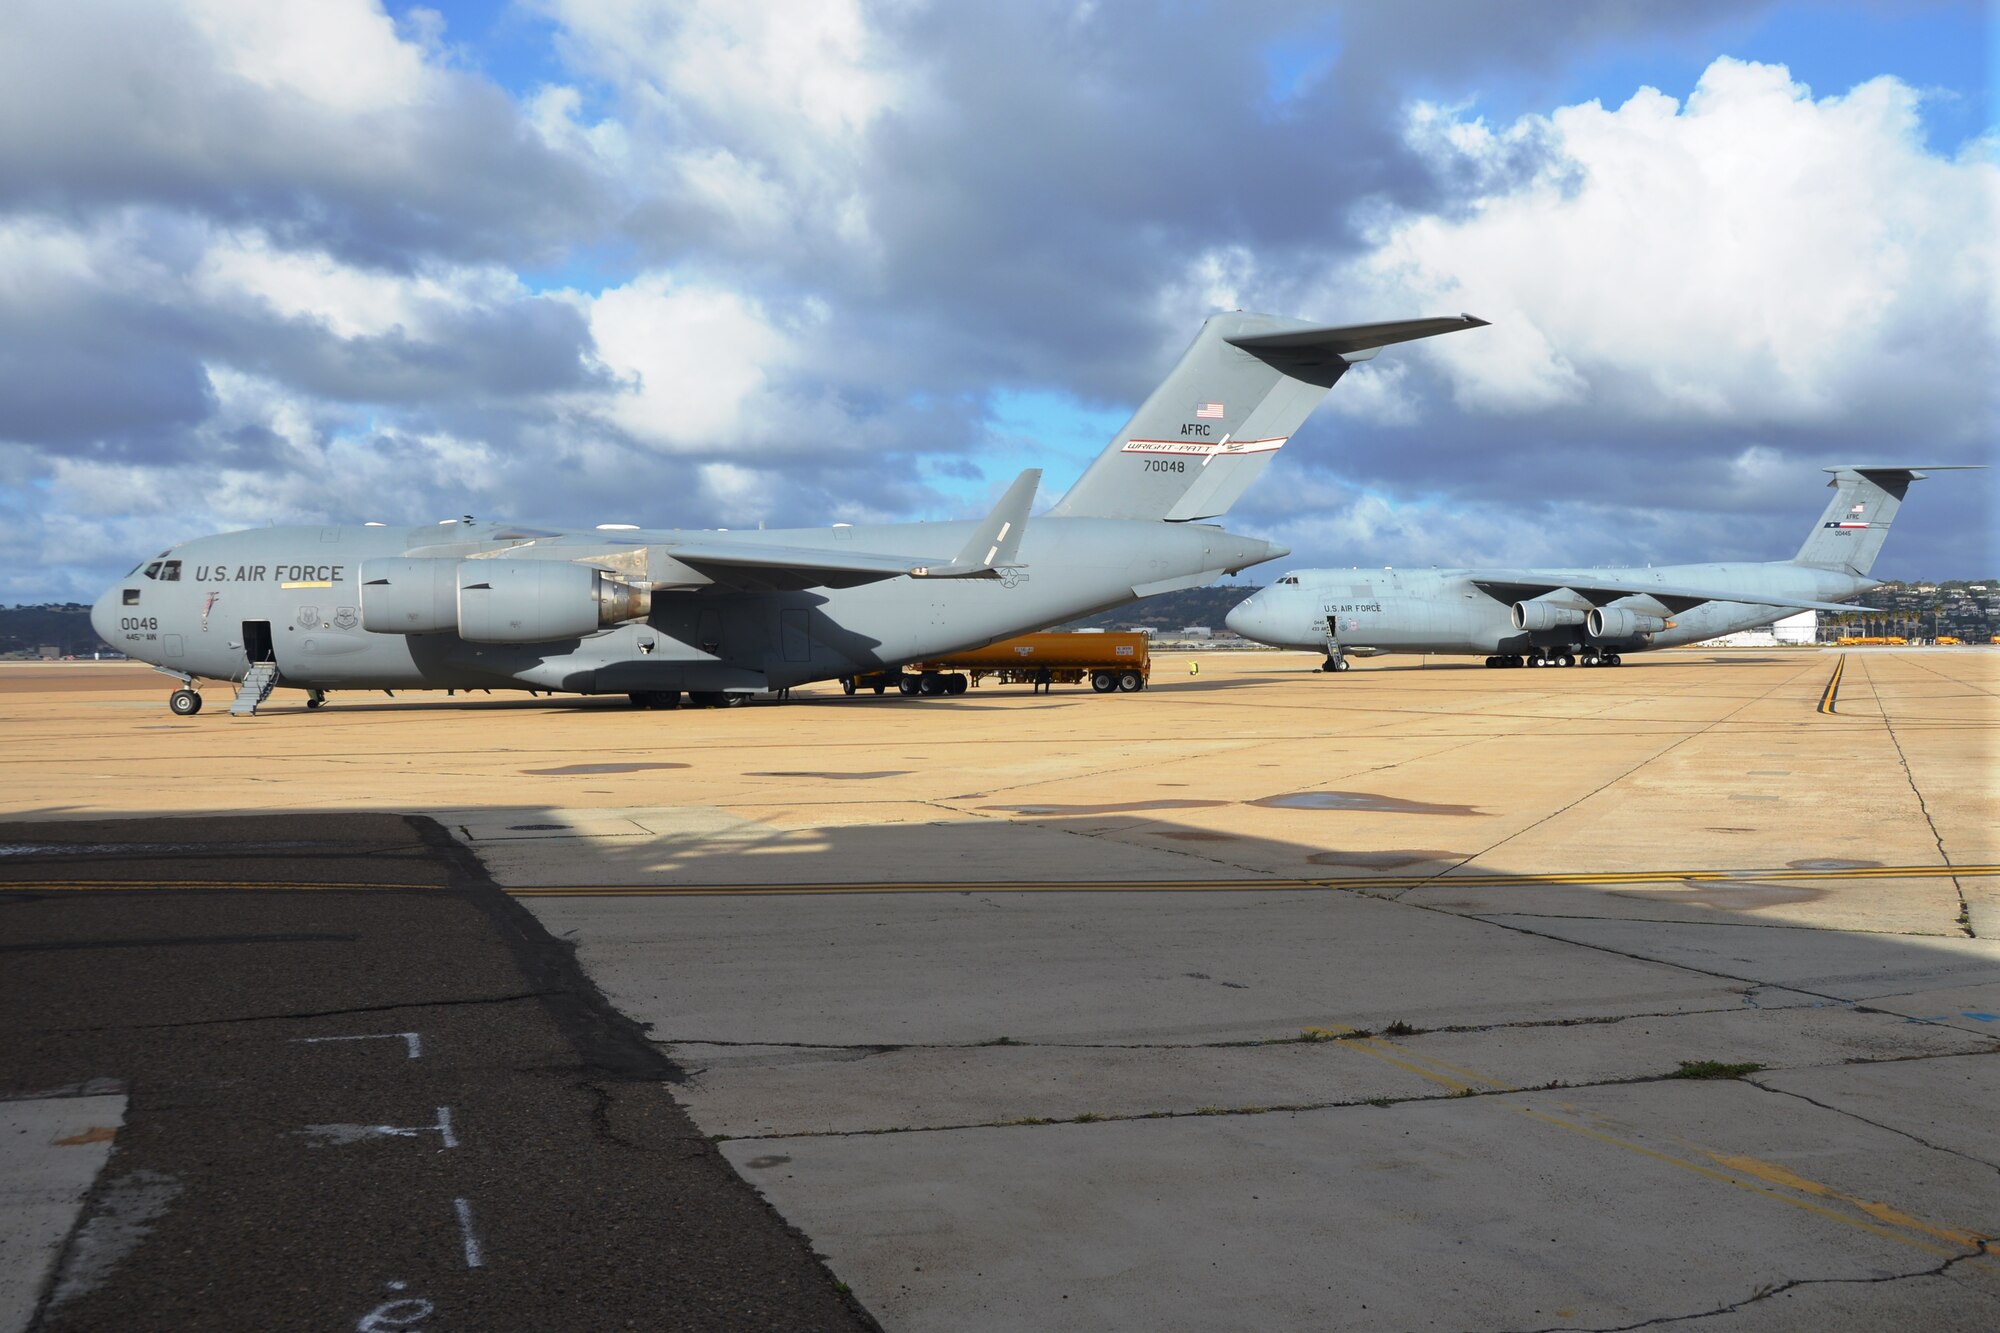 A C-17A Globemaster III (forefront) from the 445th Airlift Wing, Wright-Patterson Air Force Base, Ohio and a C-5A Galaxy from the 433rd Airlift Wing Joint Base San Antonio-Lackland sit on the flight line at the Naval Air Station, North Island, Calif., April 23-28, 2014.  Both aircraft participated in the Air Force Reserve Command’s Patriot Hook 2014 exercise. Patriot Hook is an annual Air Force Reserve Command sponsored exercise that integrates federal agencies with the military, focusing on making the most of command and support, training, integration and practicing mobilizations to disasters and emergencies. (U.S. Air Force photo/Senior Master Sgt. Minnie Jones)
